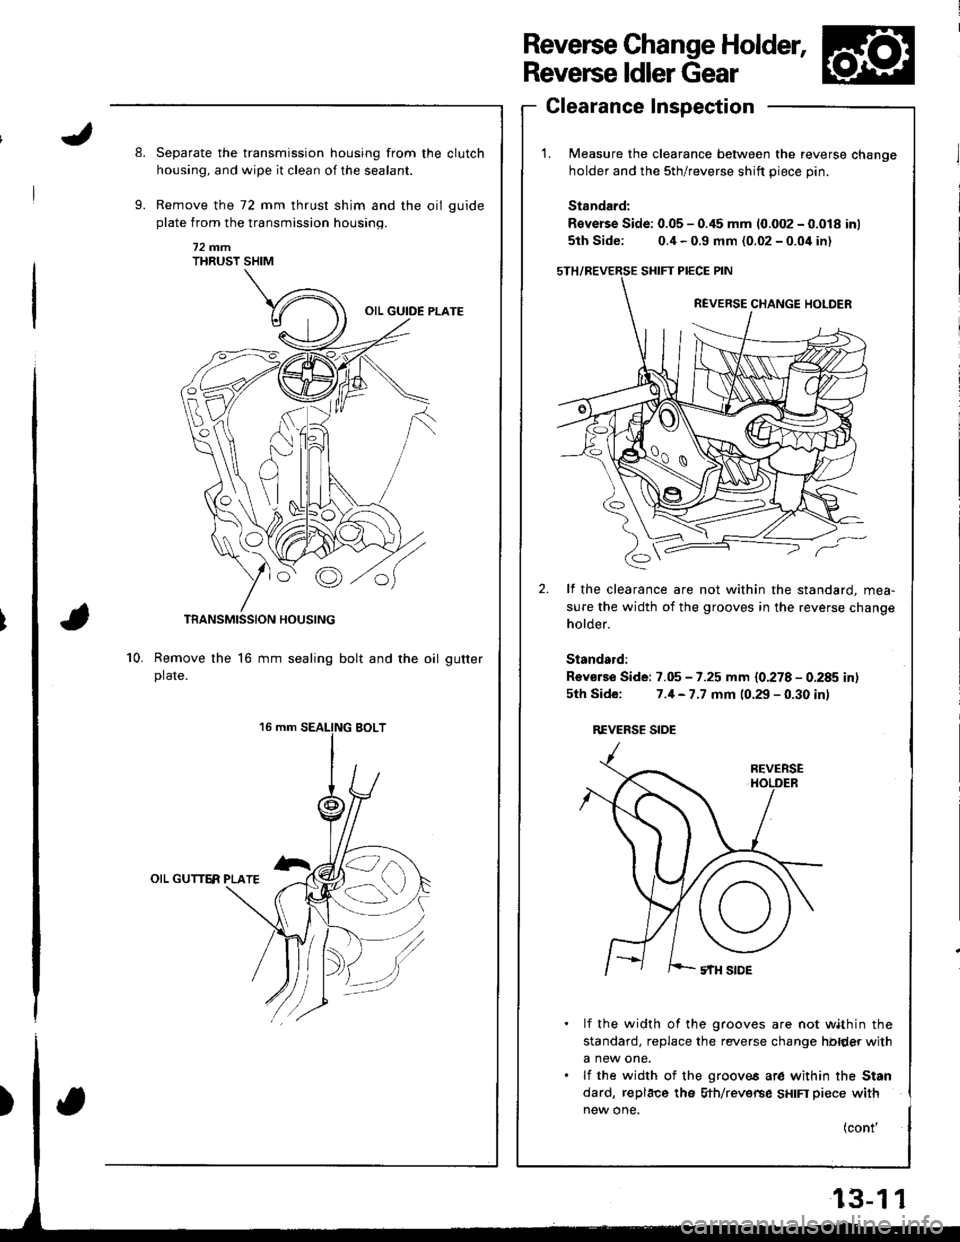 HONDA INTEGRA 1998 4.G Workshop Manual 8.
9.
f;:Y:fffrf#:Juer Sl[
Measure the clearance between the reverse change
holder and the sth/reverse shift piece pin.
Standard:
Reverse Side: 0.05 - 0.45 mm (0.002 - 0.018 inl
5th Side: 0.4 - 0.9 